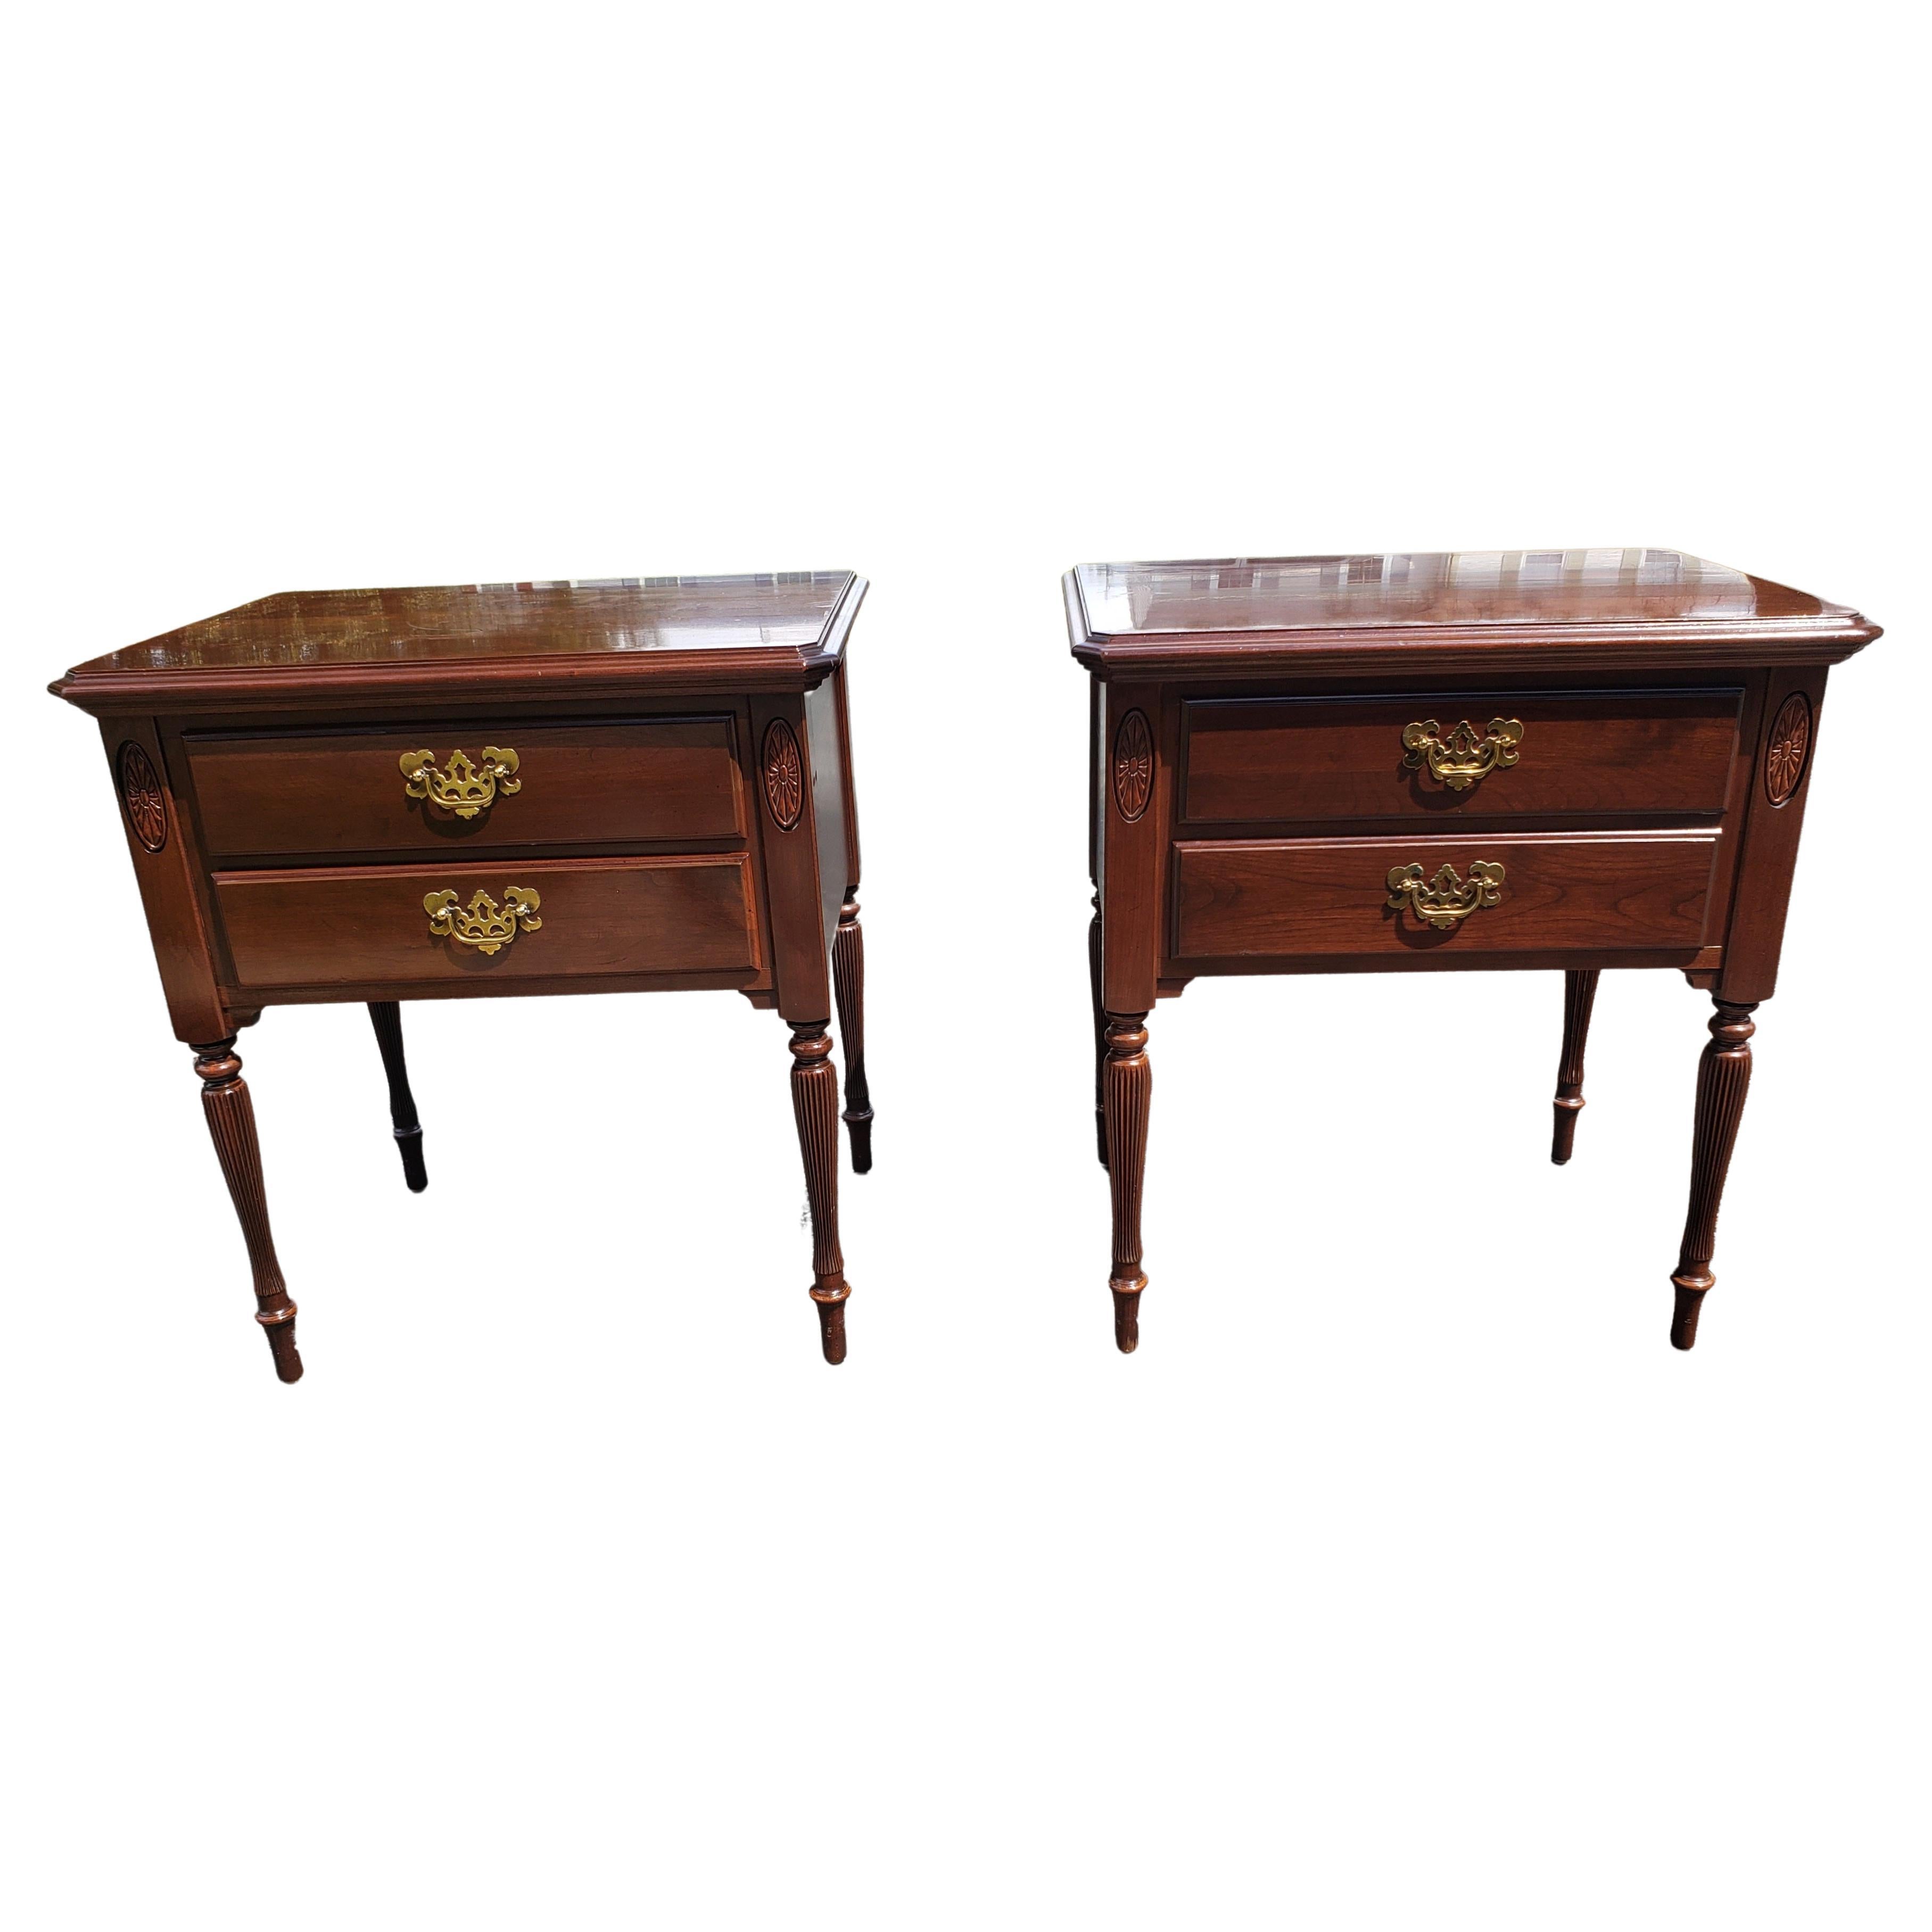 A gorgeous pair of 1990s Georgian style two drawers side tables or nightstands with fluted canellured legs and dovetail construction drawers. Measures 24